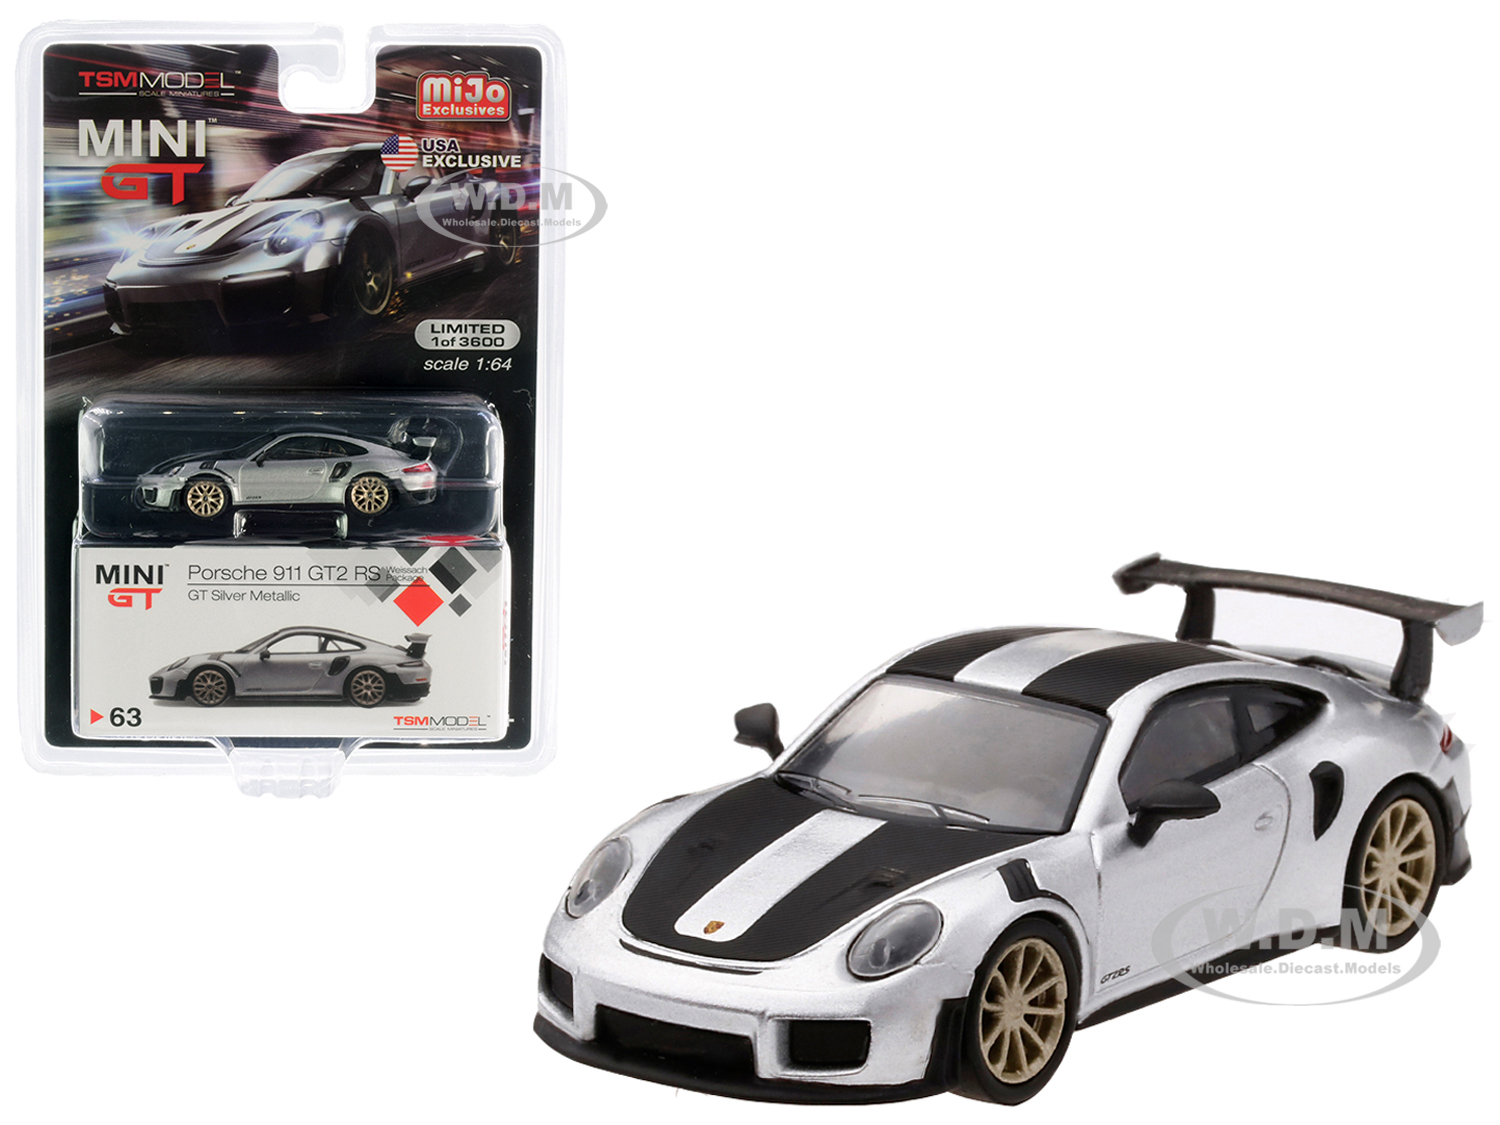 Porsche 911 Gt2 Rs Weissach Package Gt Silver Metallic With Carbon Stripes Limited Edition To 3600 Pieces Worldwide 1/64 Diecast Model Car By True Sc